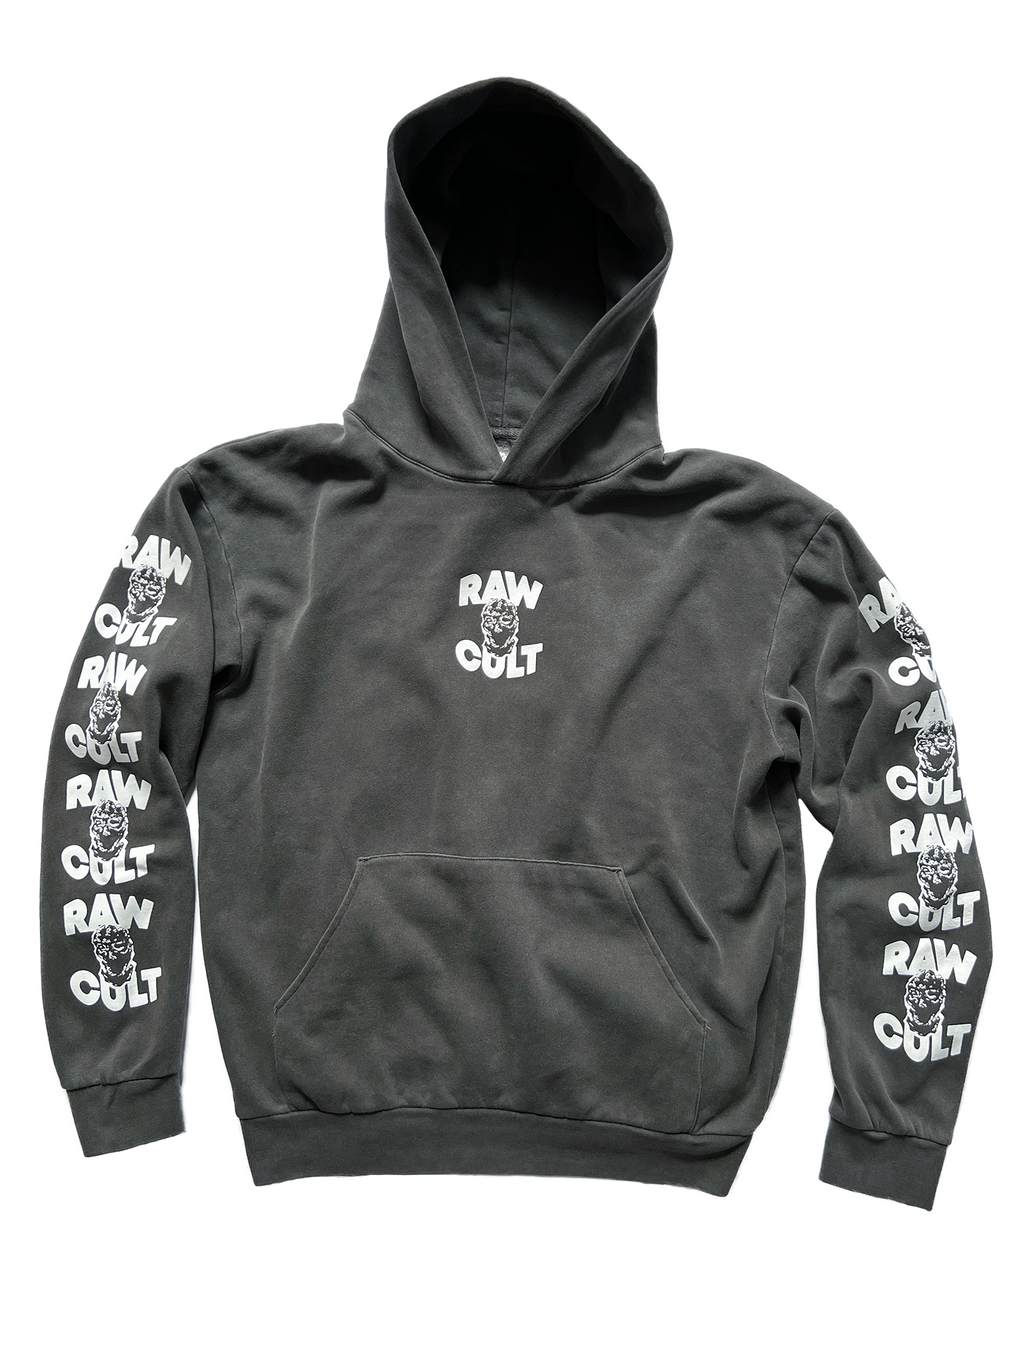 RAW CULT | Mask CULT Hoodie - White on Pigment Black